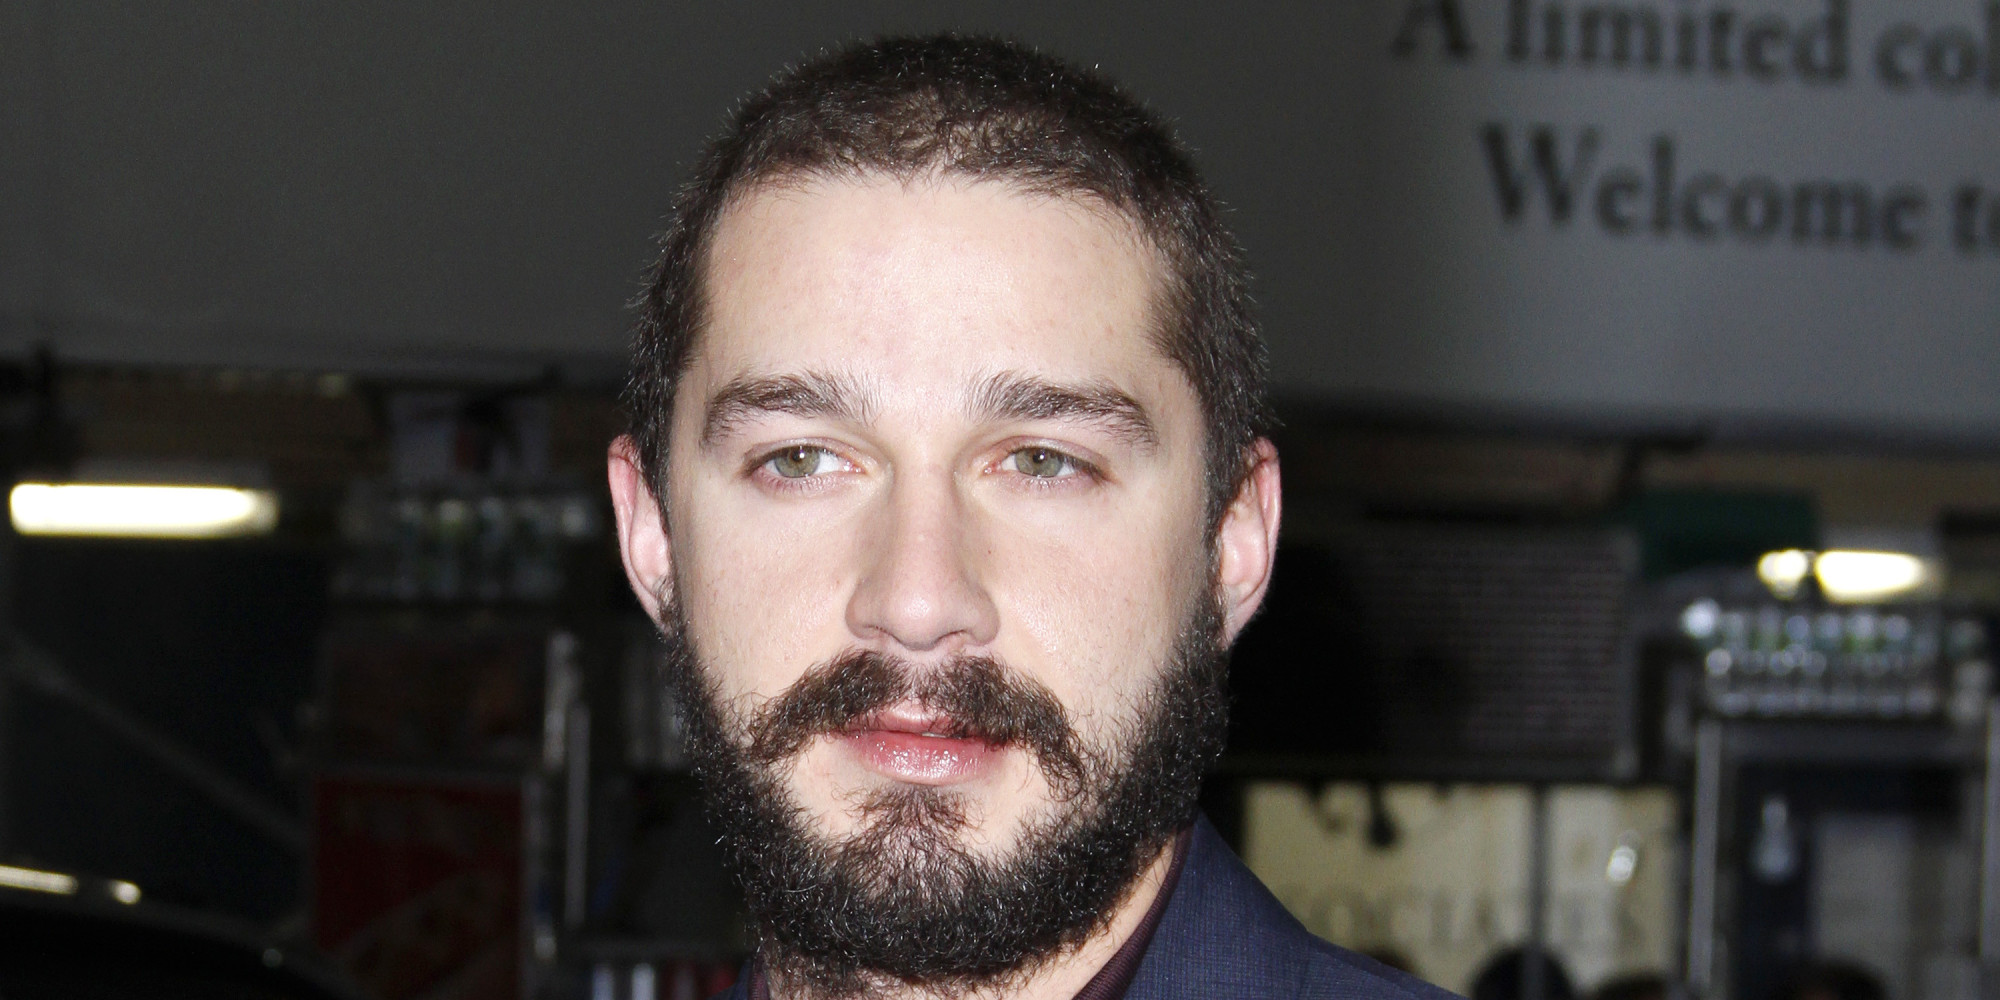 A Definitive Guide To The Decline Of Shia LaBeouf [UPDATED] | HuffPost